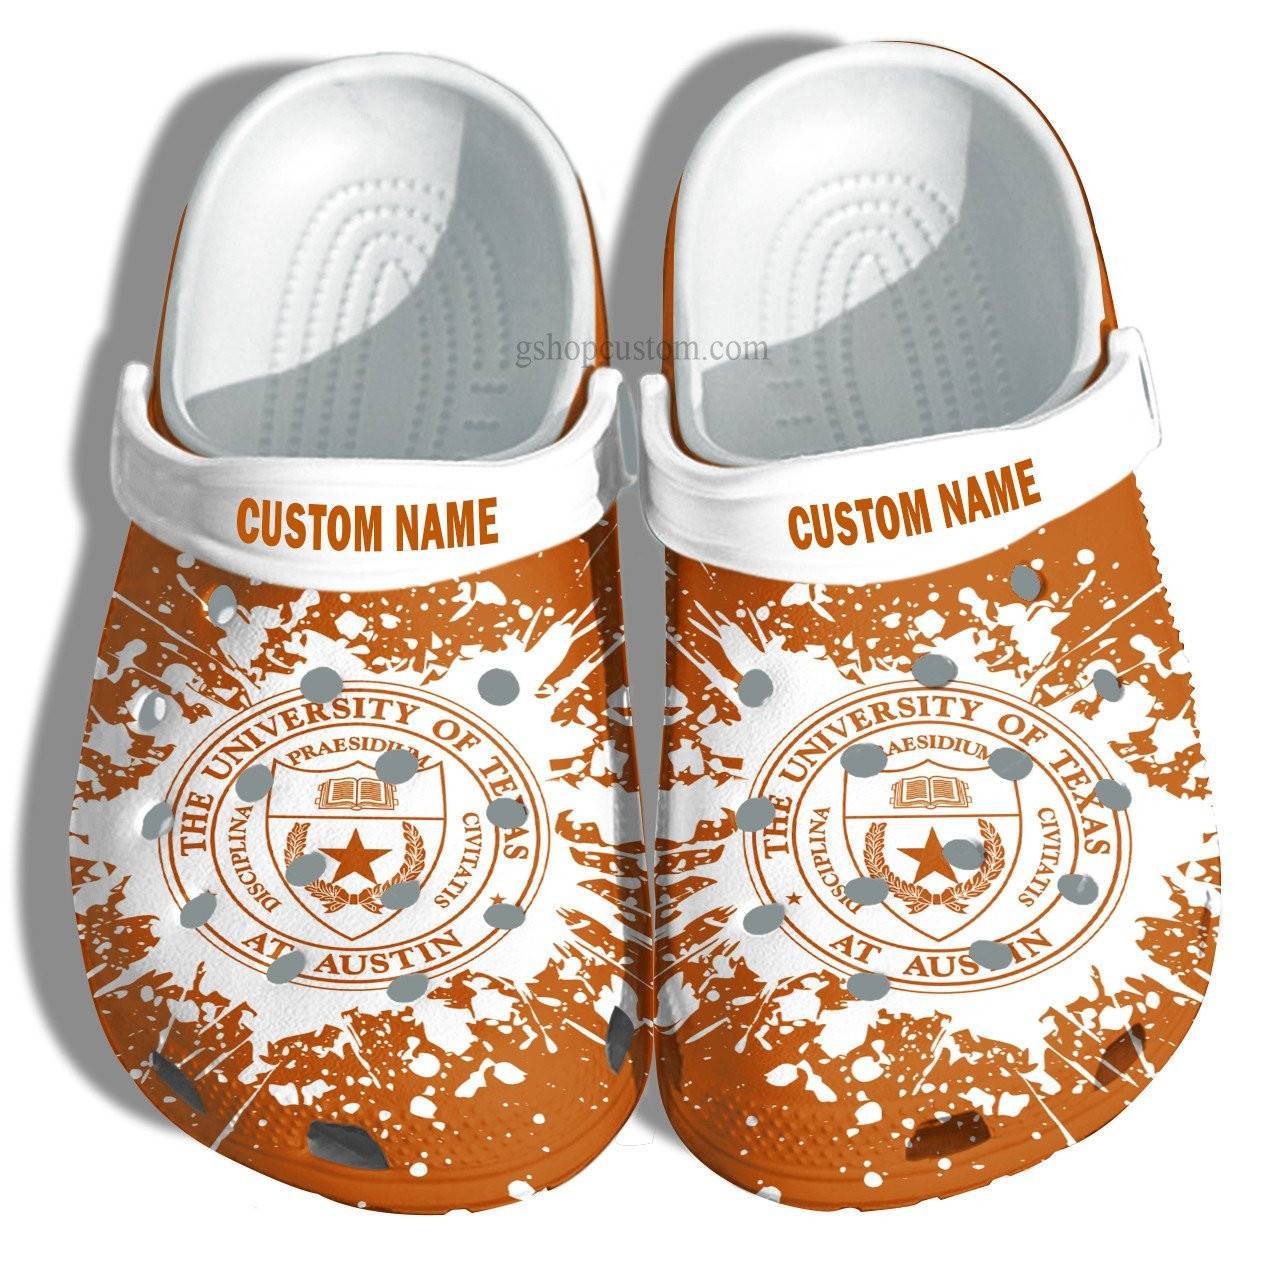 The University Of Texas Croc Shoes Customize – University Graduation Gifts Crocss Shoes Admission Gift